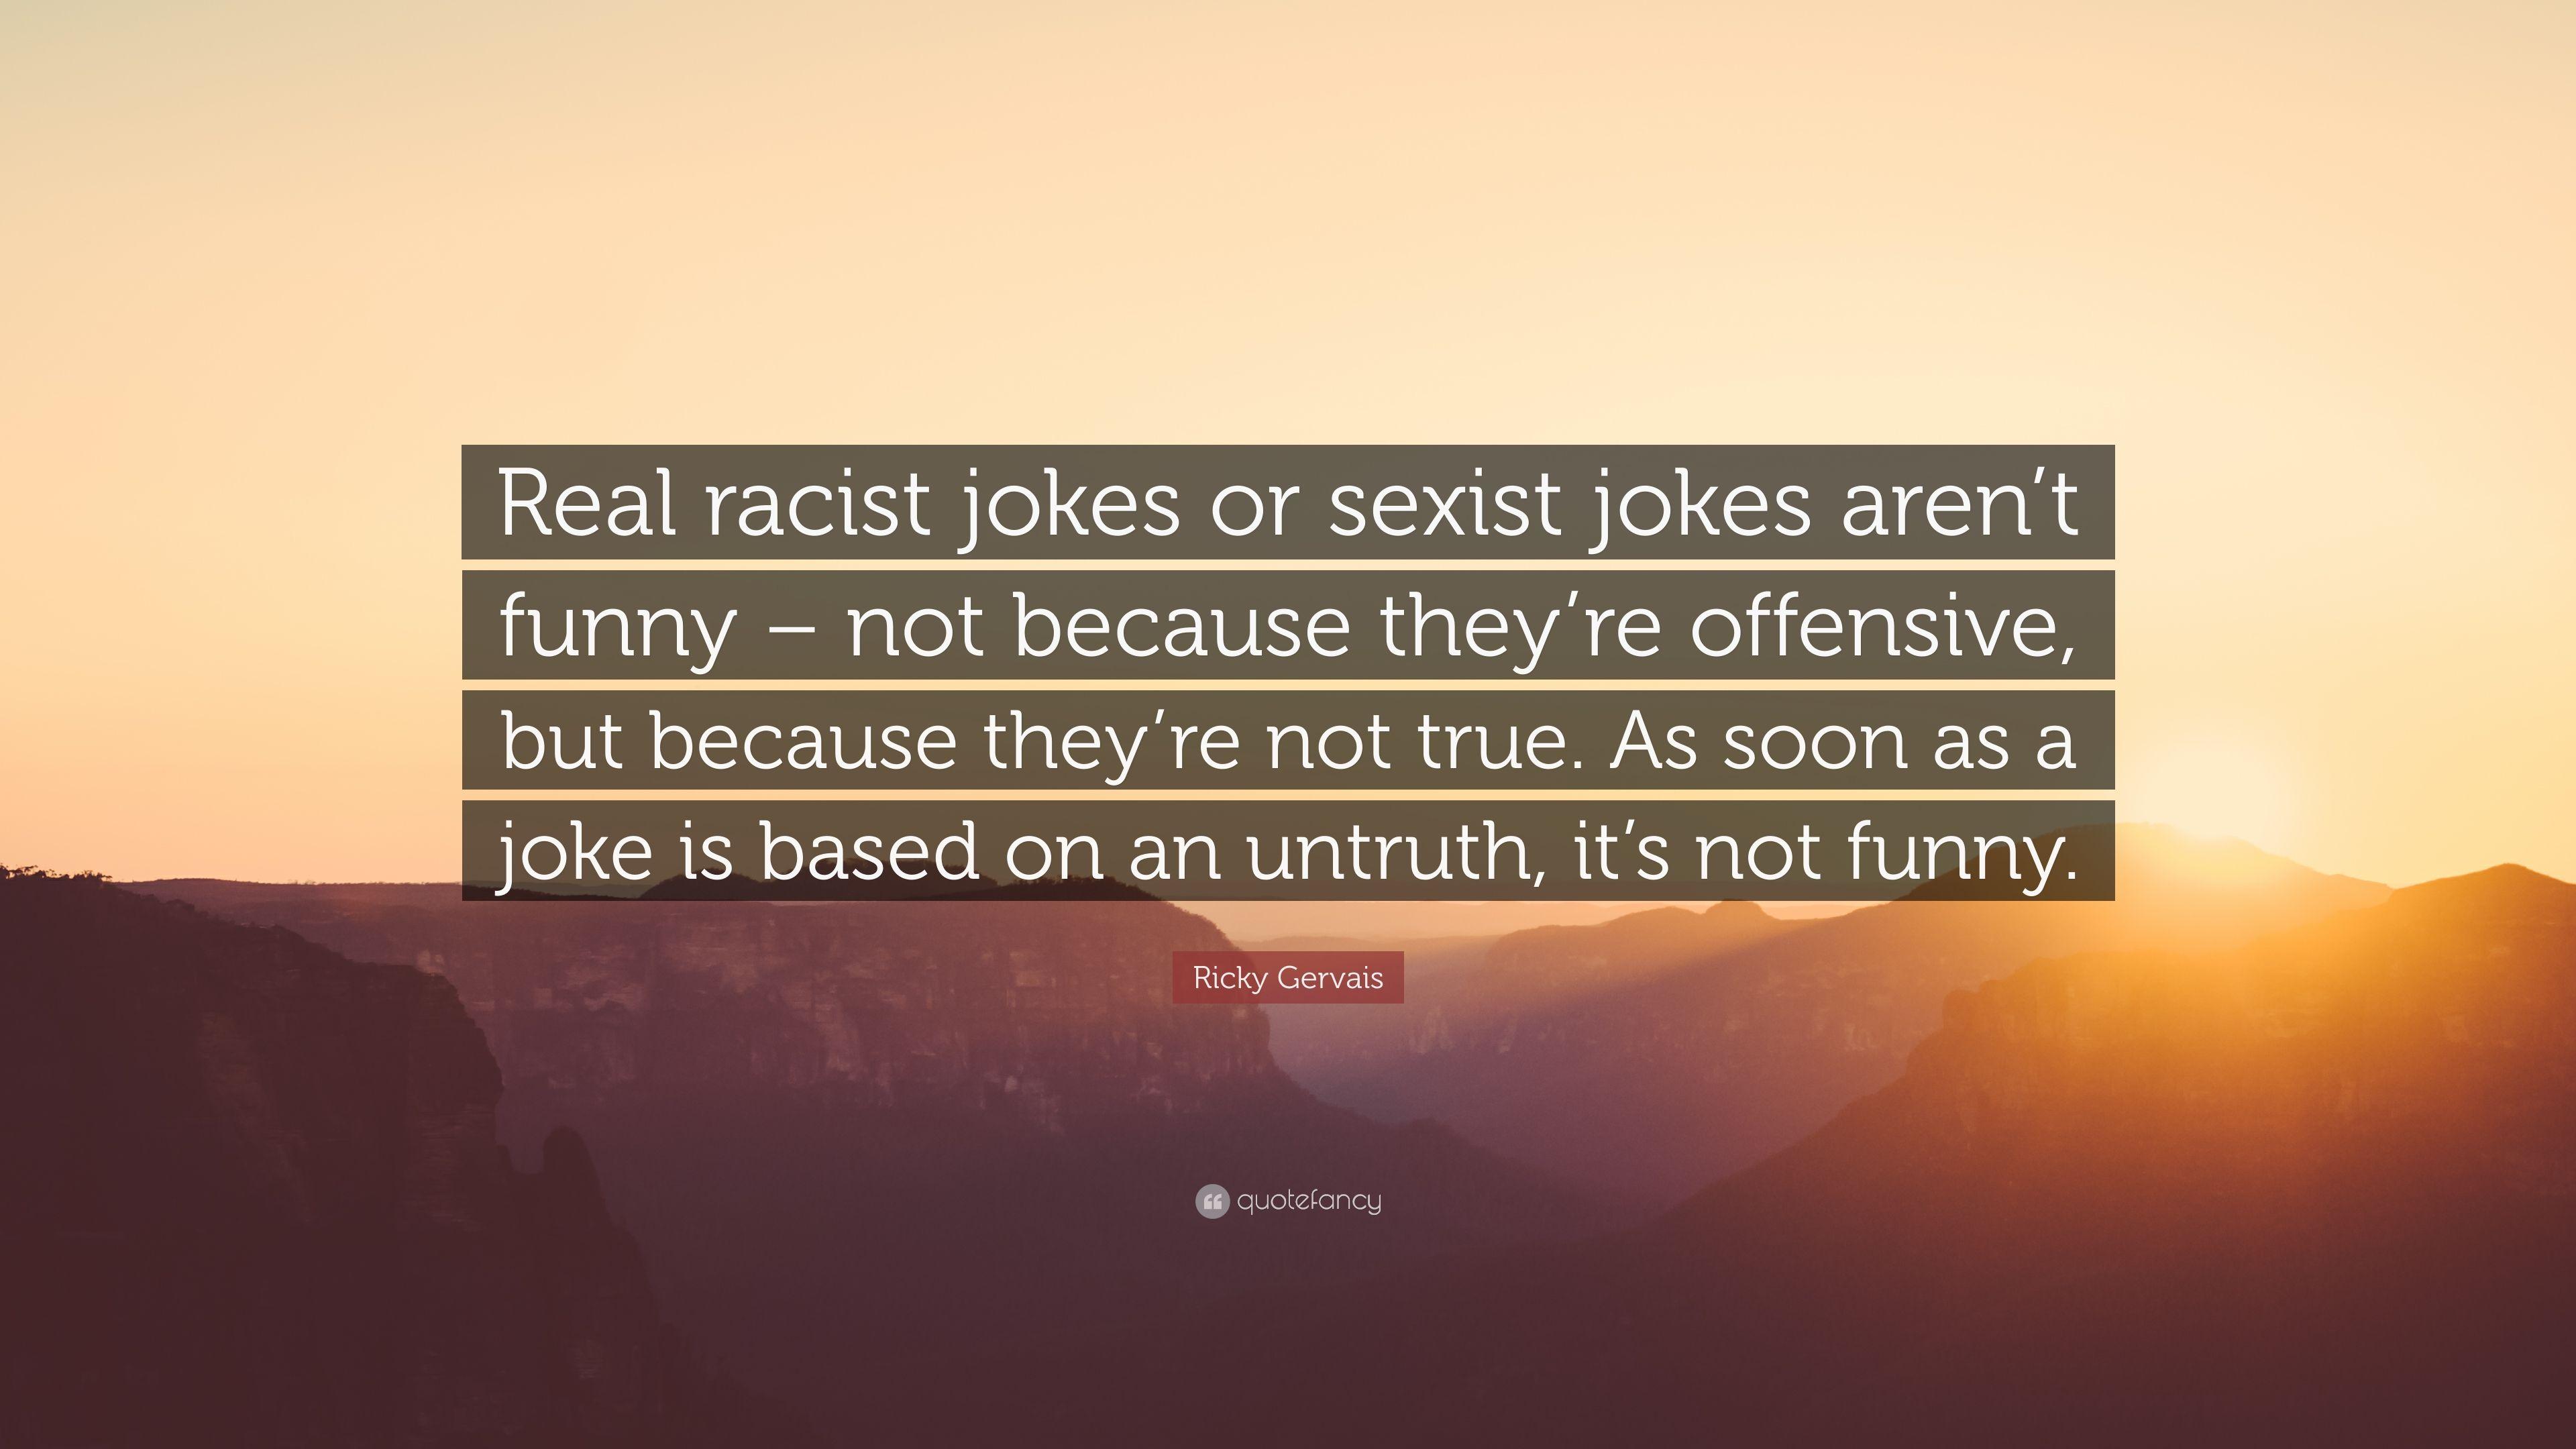 Ricky Gervais Quote: “Real racist jokes or sexist jokes aren't funny